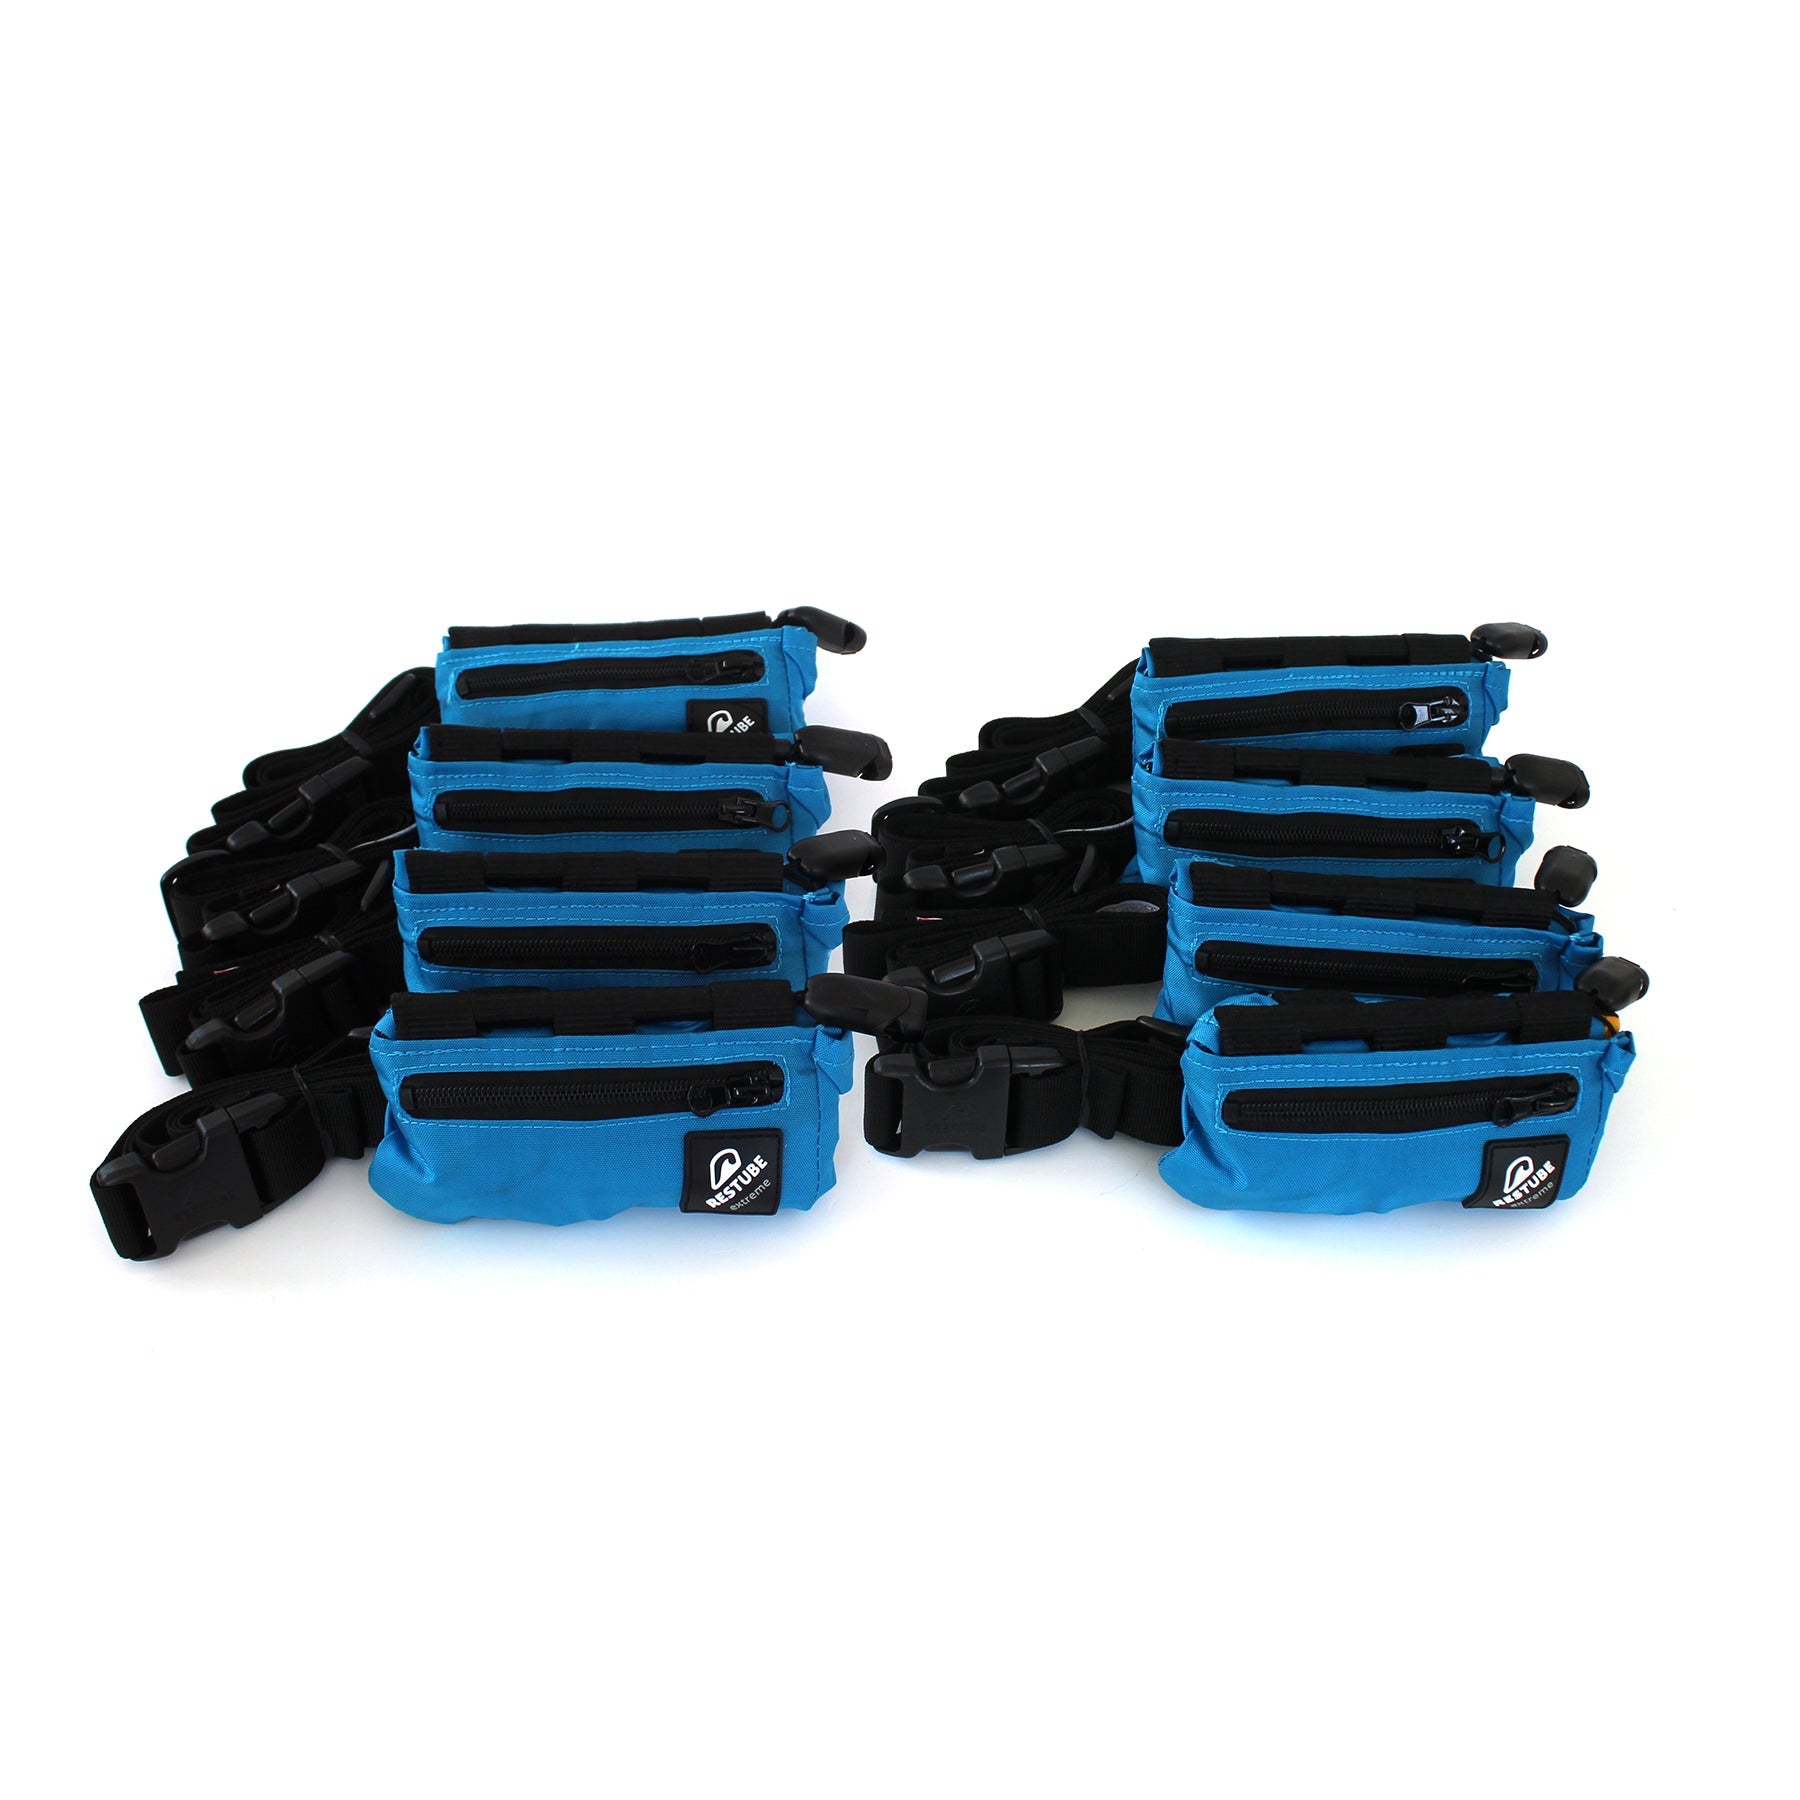 Eight Restube extreme packed in blue pouches